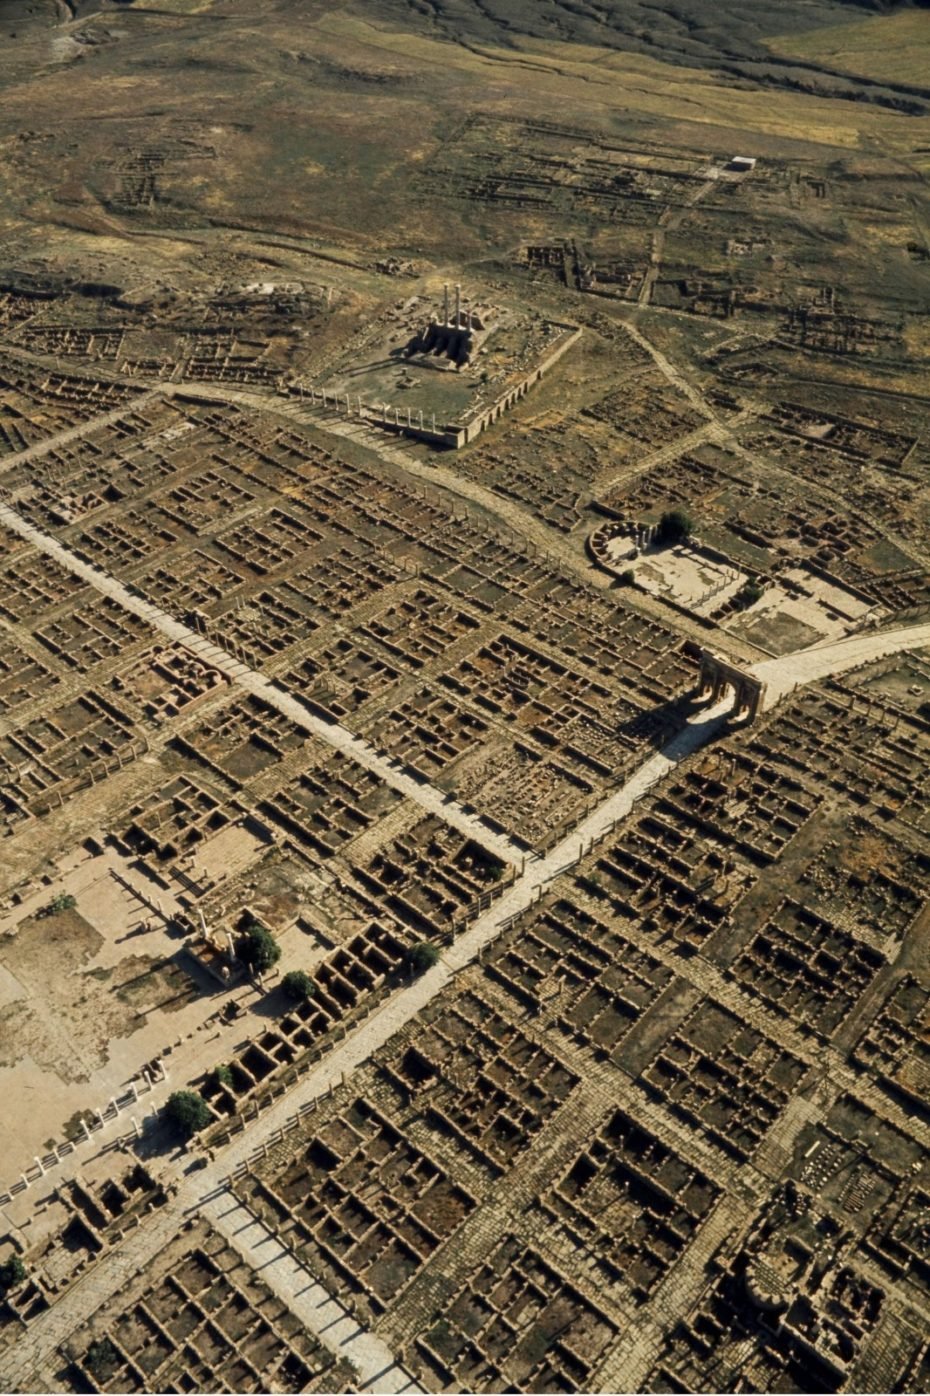 Buried In The Sand For A Millennium: Africa's Roman Ghost City - AMZ Newspaper